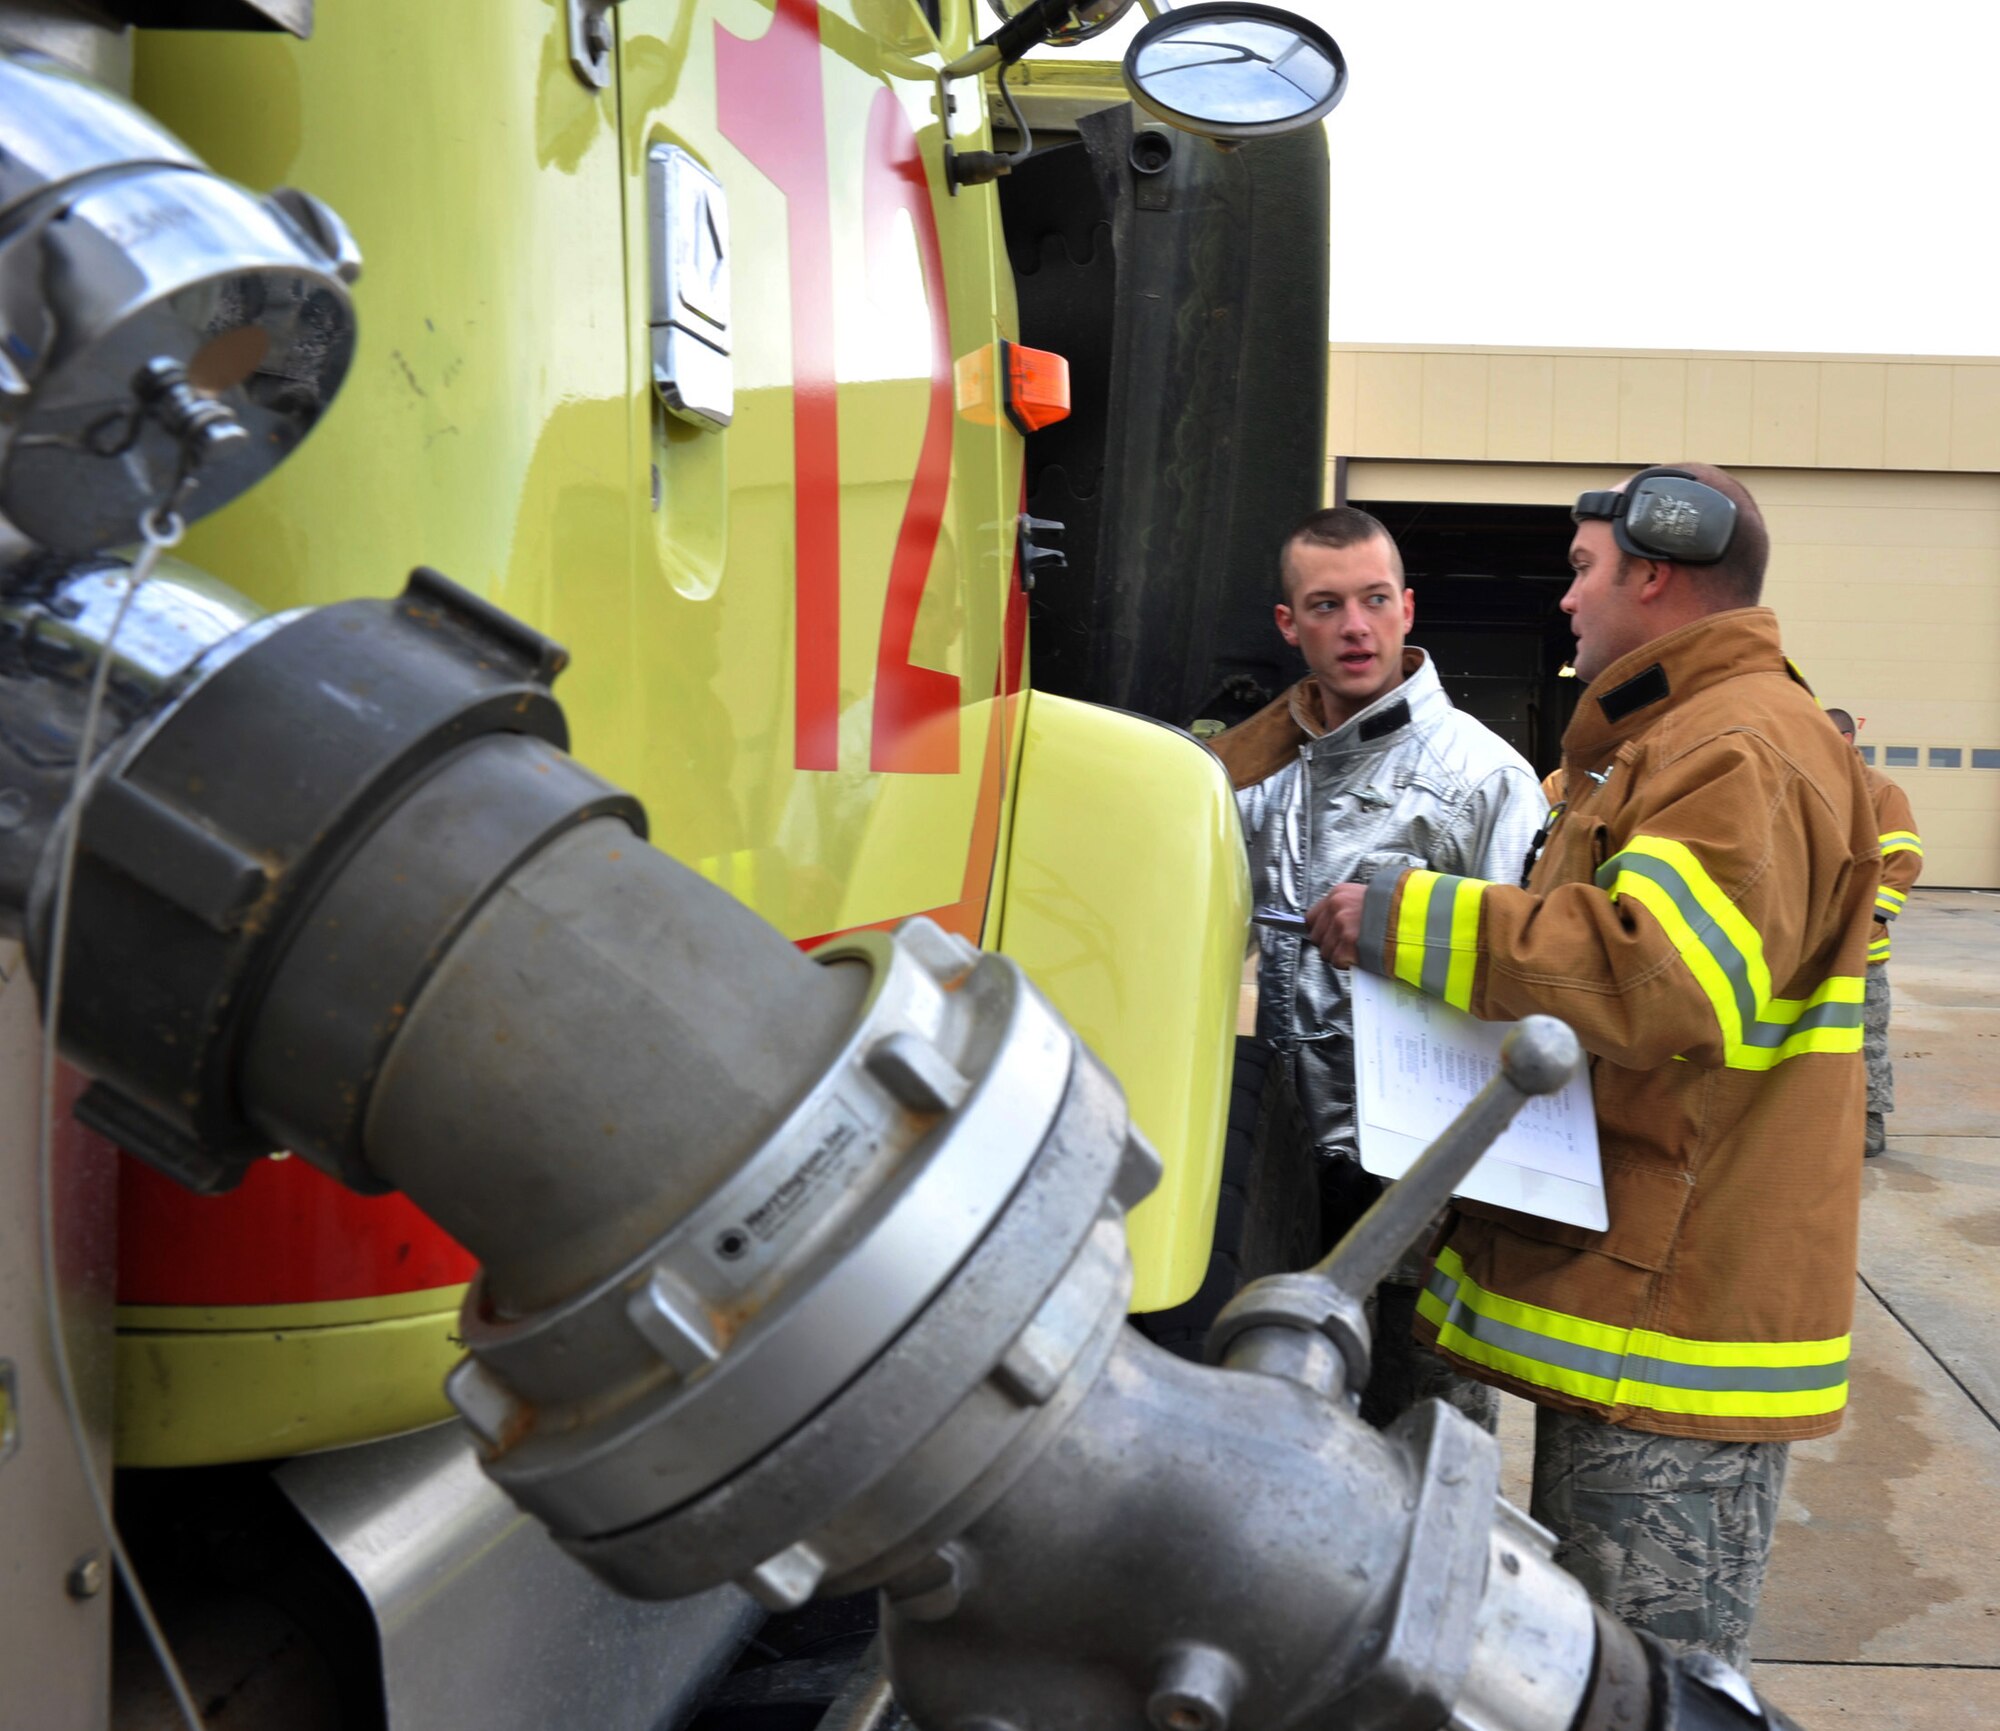 Airman 1st Class Kyle Lawall and Staff Sgt. James Barding, Team Whiteman firefighters, perform a vehicle inspection Dec. 5 at Whiteman Air Force Base, Mo. Whiteman AFB Fire Emergency Services works all day, every day to protect Team Whiteman and provide assistance in the surrounding communities. (U.S. Air Force photo/Heidi Hunt) (Released)